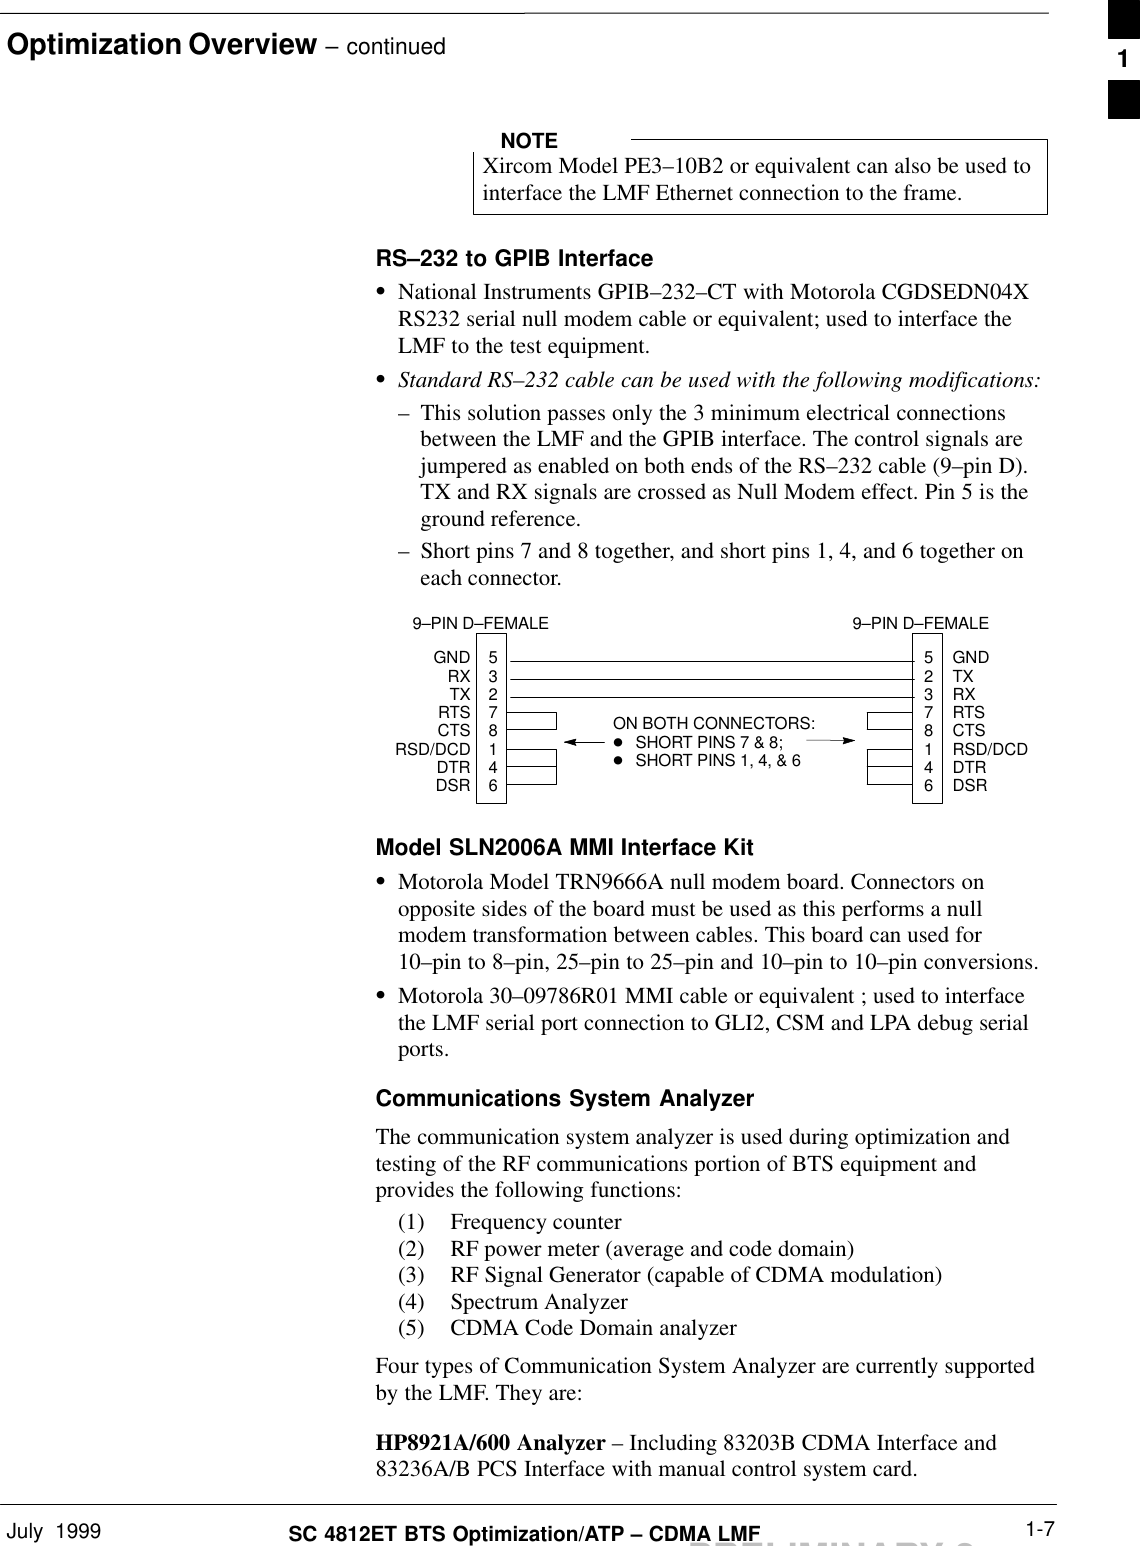 Optimization Overview – continuedJuly  1999 1-7SC 4812ET BTS Optimization/ATP – CDMA LMFPRELIMINARY 2Xircom Model PE3–10B2 or equivalent can also be used tointerface the LMF Ethernet connection to the frame.NOTERS–232 to GPIB InterfaceSNational Instruments GPIB–232–CT with Motorola CGDSEDN04XRS232 serial null modem cable or equivalent; used to interface theLMF to the test equipment.SStandard RS–232 cable can be used with the following modifications:– This solution passes only the 3 minimum electrical connectionsbetween the LMF and the GPIB interface. The control signals arejumpered as enabled on both ends of the RS–232 cable (9–pin D).TX and RX signals are crossed as Null Modem effect. Pin 5 is theground reference.– Short pins 7 and 8 together, and short pins 1, 4, and 6 together oneach connector.5327814652378146GNDRXTXRTSCTSRSD/DCDDTRDSRGNDTXRXRTSCTSRSD/DCDDTRDSRON BOTH CONNECTORS:DSHORT PINS 7 &amp; 8; DSHORT PINS 1, 4, &amp; 69–PIN D–FEMALE 9–PIN D–FEMALEModel SLN2006A MMI Interface KitSMotorola Model TRN9666A null modem board. Connectors onopposite sides of the board must be used as this performs a nullmodem transformation between cables. This board can used for10–pin to 8–pin, 25–pin to 25–pin and 10–pin to 10–pin conversions.SMotorola 30–09786R01 MMI cable or equivalent ; used to interfacethe LMF serial port connection to GLI2, CSM and LPA debug serialports.Communications System AnalyzerThe communication system analyzer is used during optimization andtesting of the RF communications portion of BTS equipment andprovides the following functions:(1) Frequency counter(2) RF power meter (average and code domain)(3) RF Signal Generator (capable of CDMA modulation)(4) Spectrum Analyzer(5) CDMA Code Domain analyzerFour types of Communication System Analyzer are currently supportedby the LMF. They are:HP8921A/600 Analyzer – Including 83203B CDMA Interface and83236A/B PCS Interface with manual control system card.1